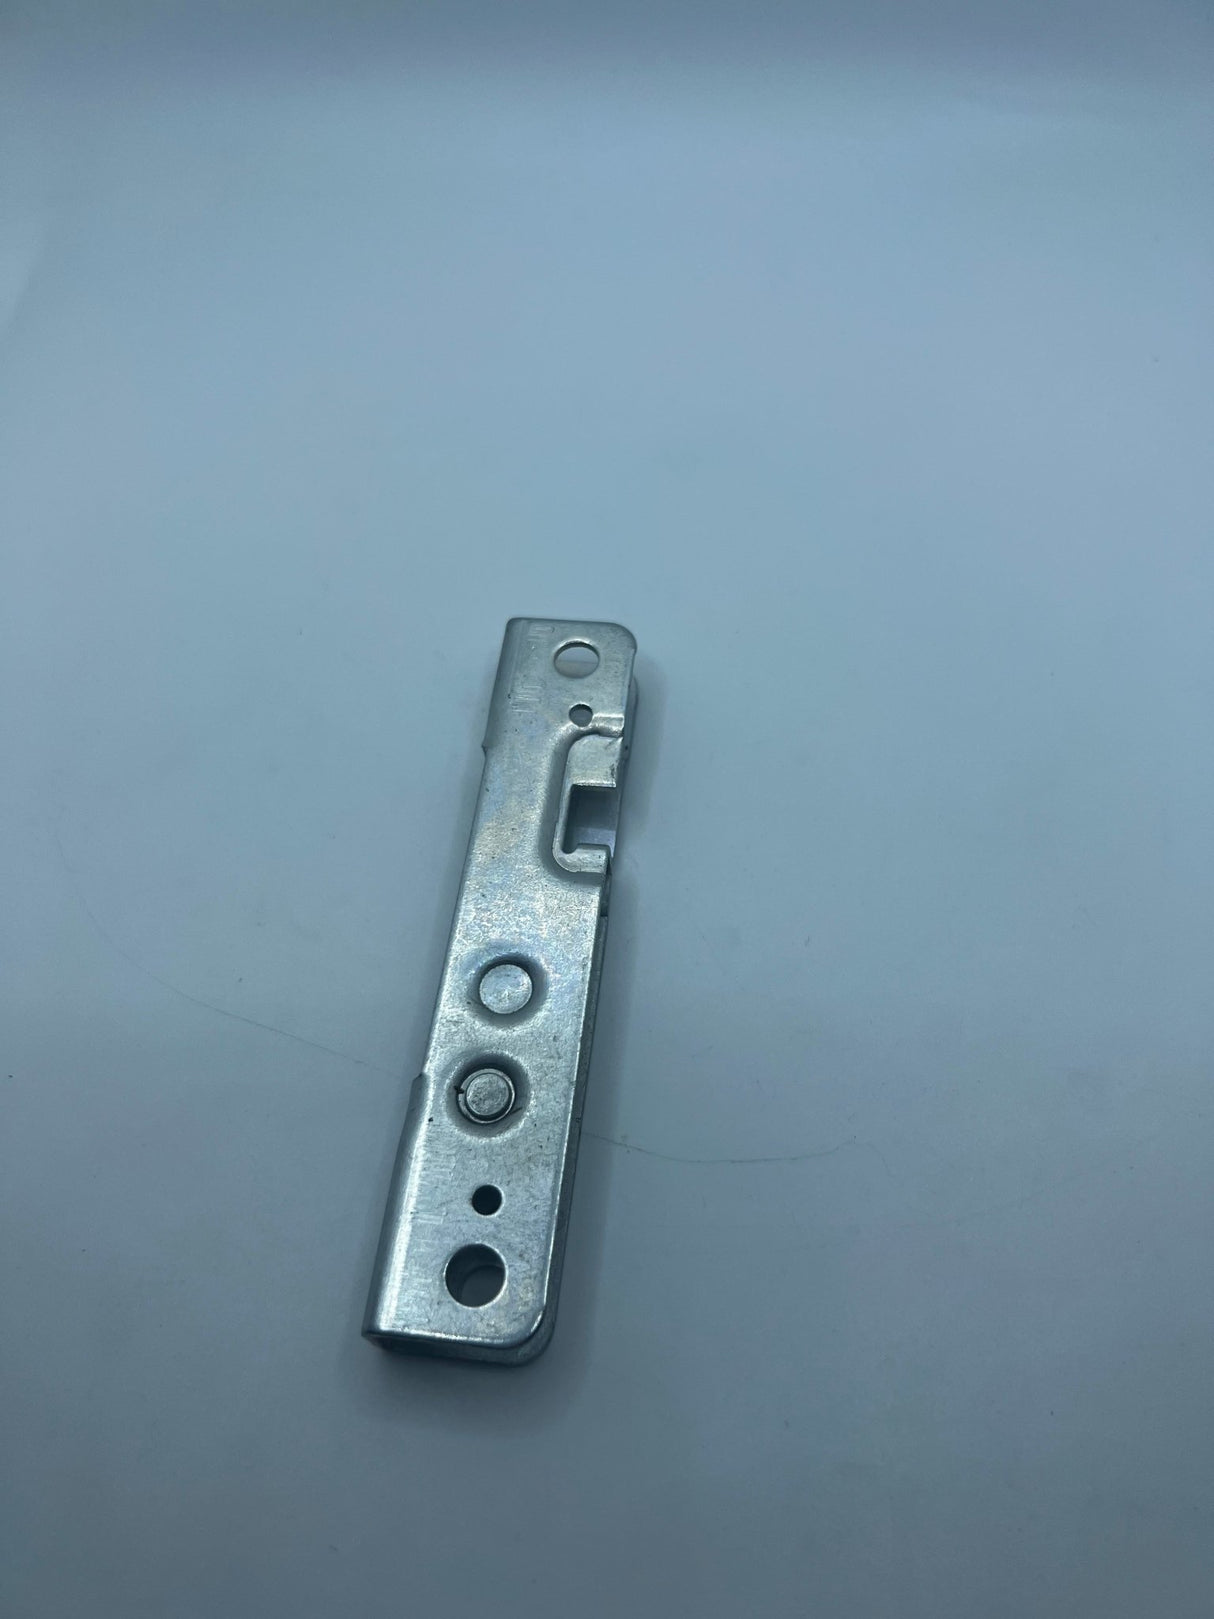 Ilve 900mm Oven Door Hinge Retainer Single A/468/04 - My Oven Spares-Ilve-A/468/04-5